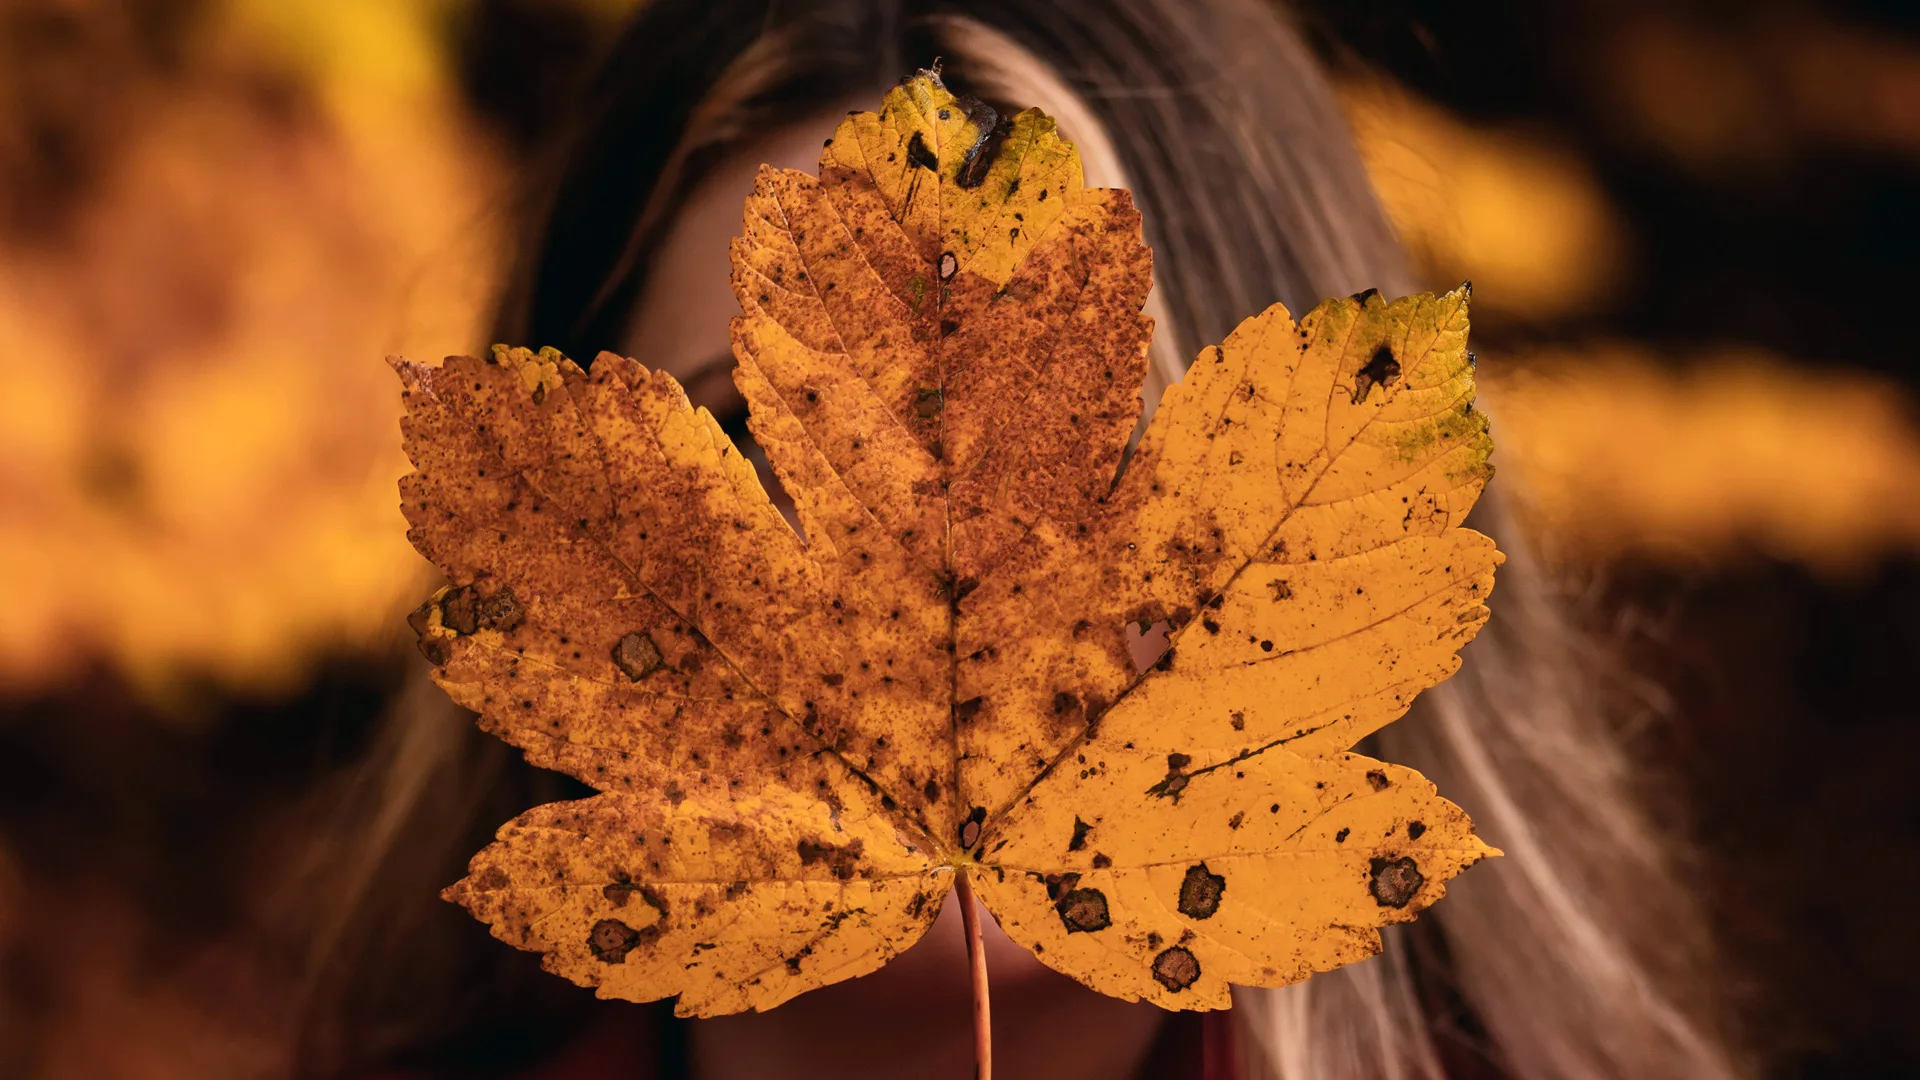 Gold autumn leaf with speccles held up in front of woman's face